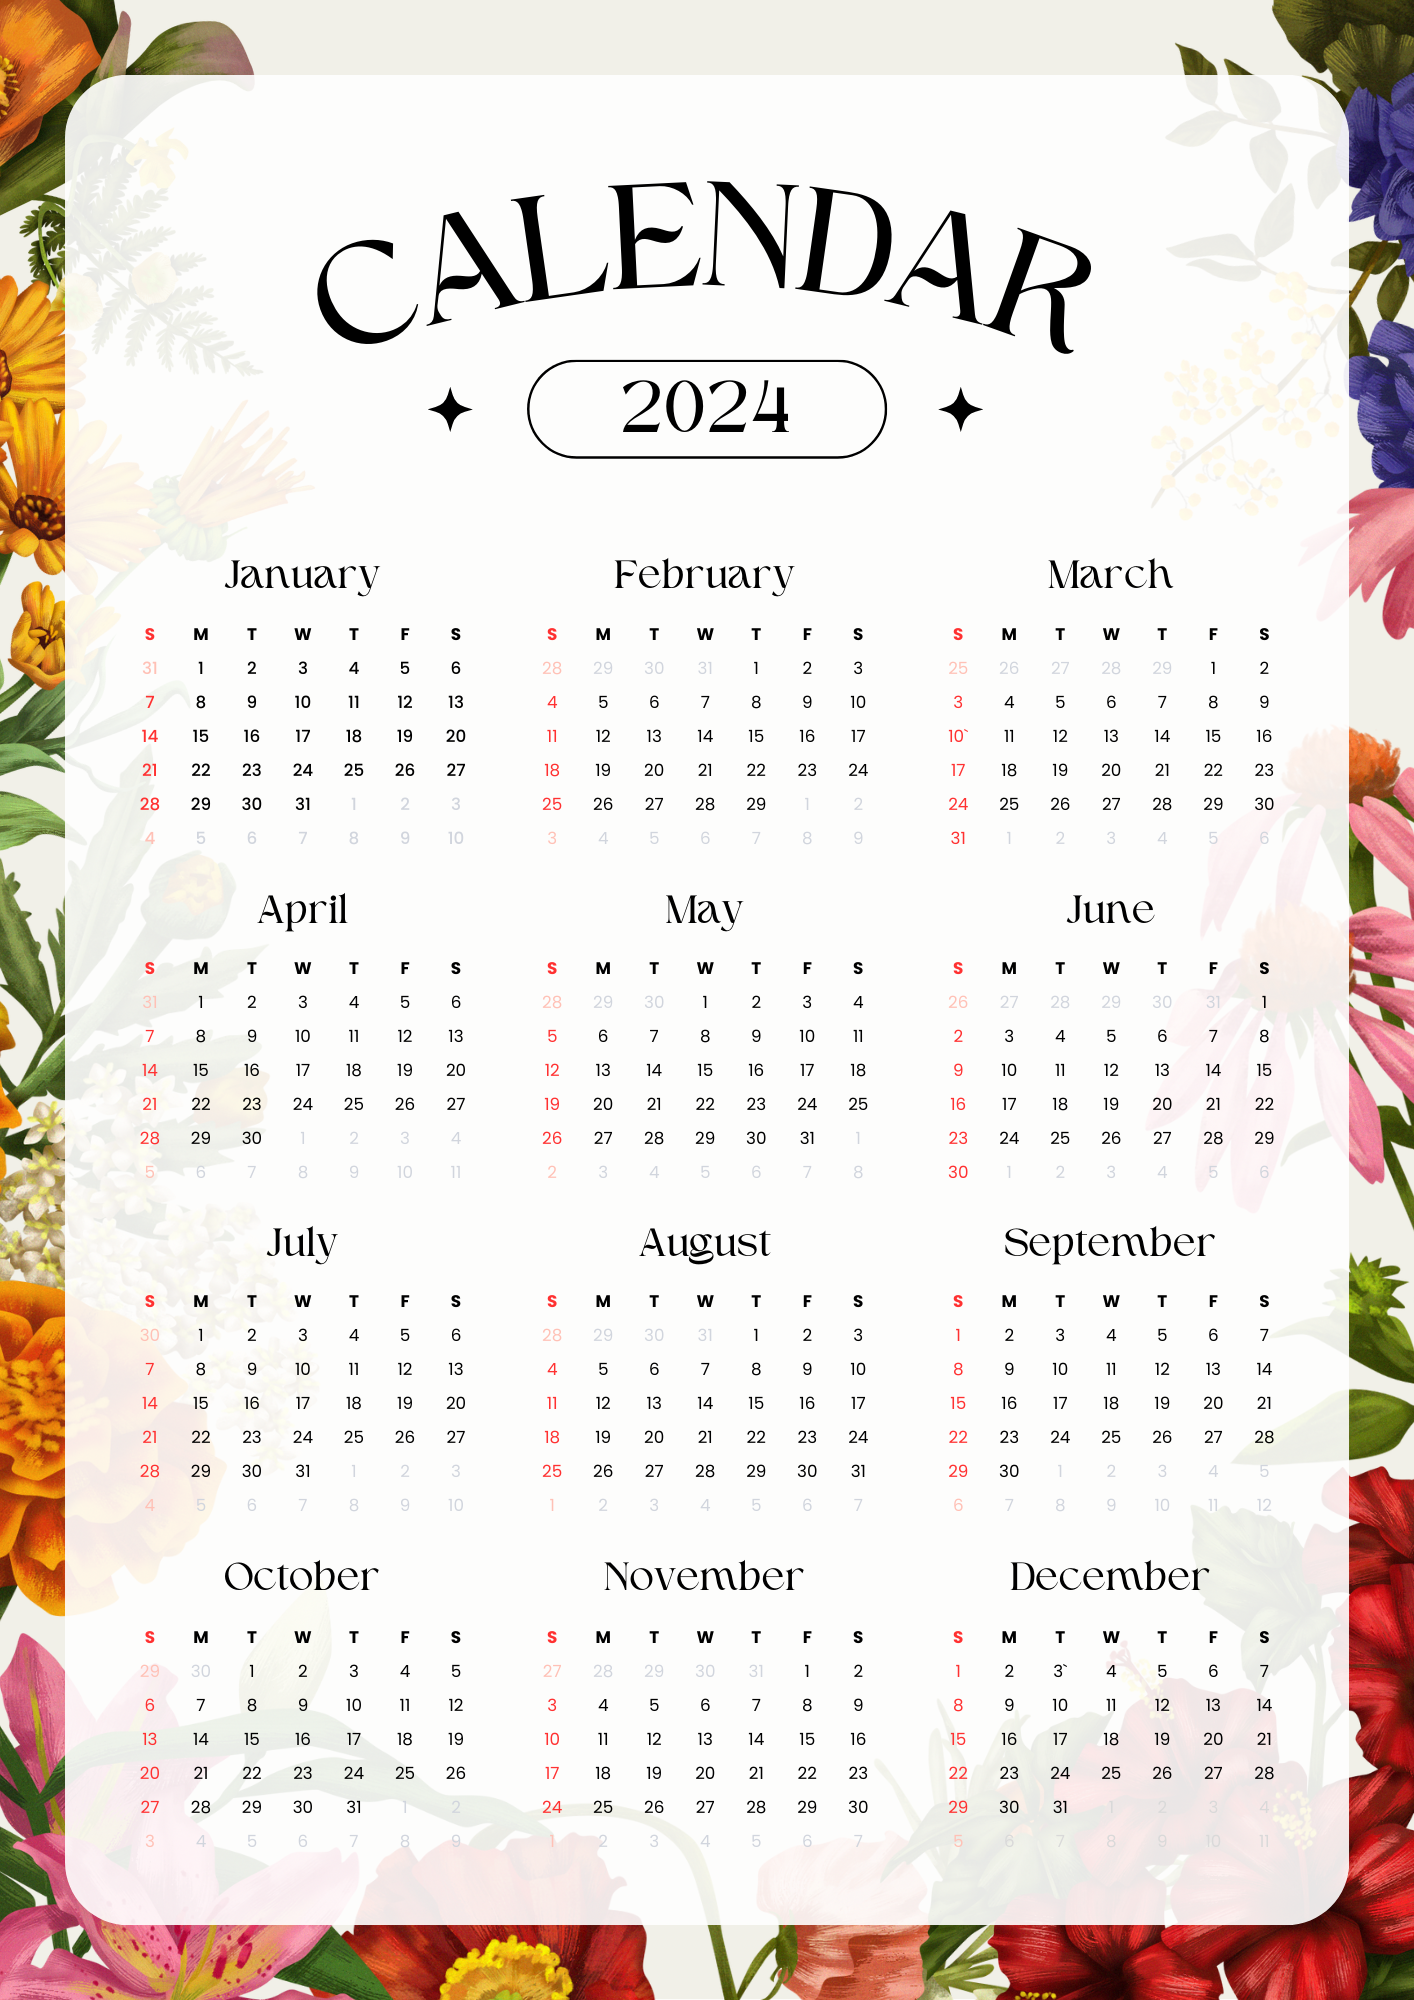 2024 Yearly Calendar Template